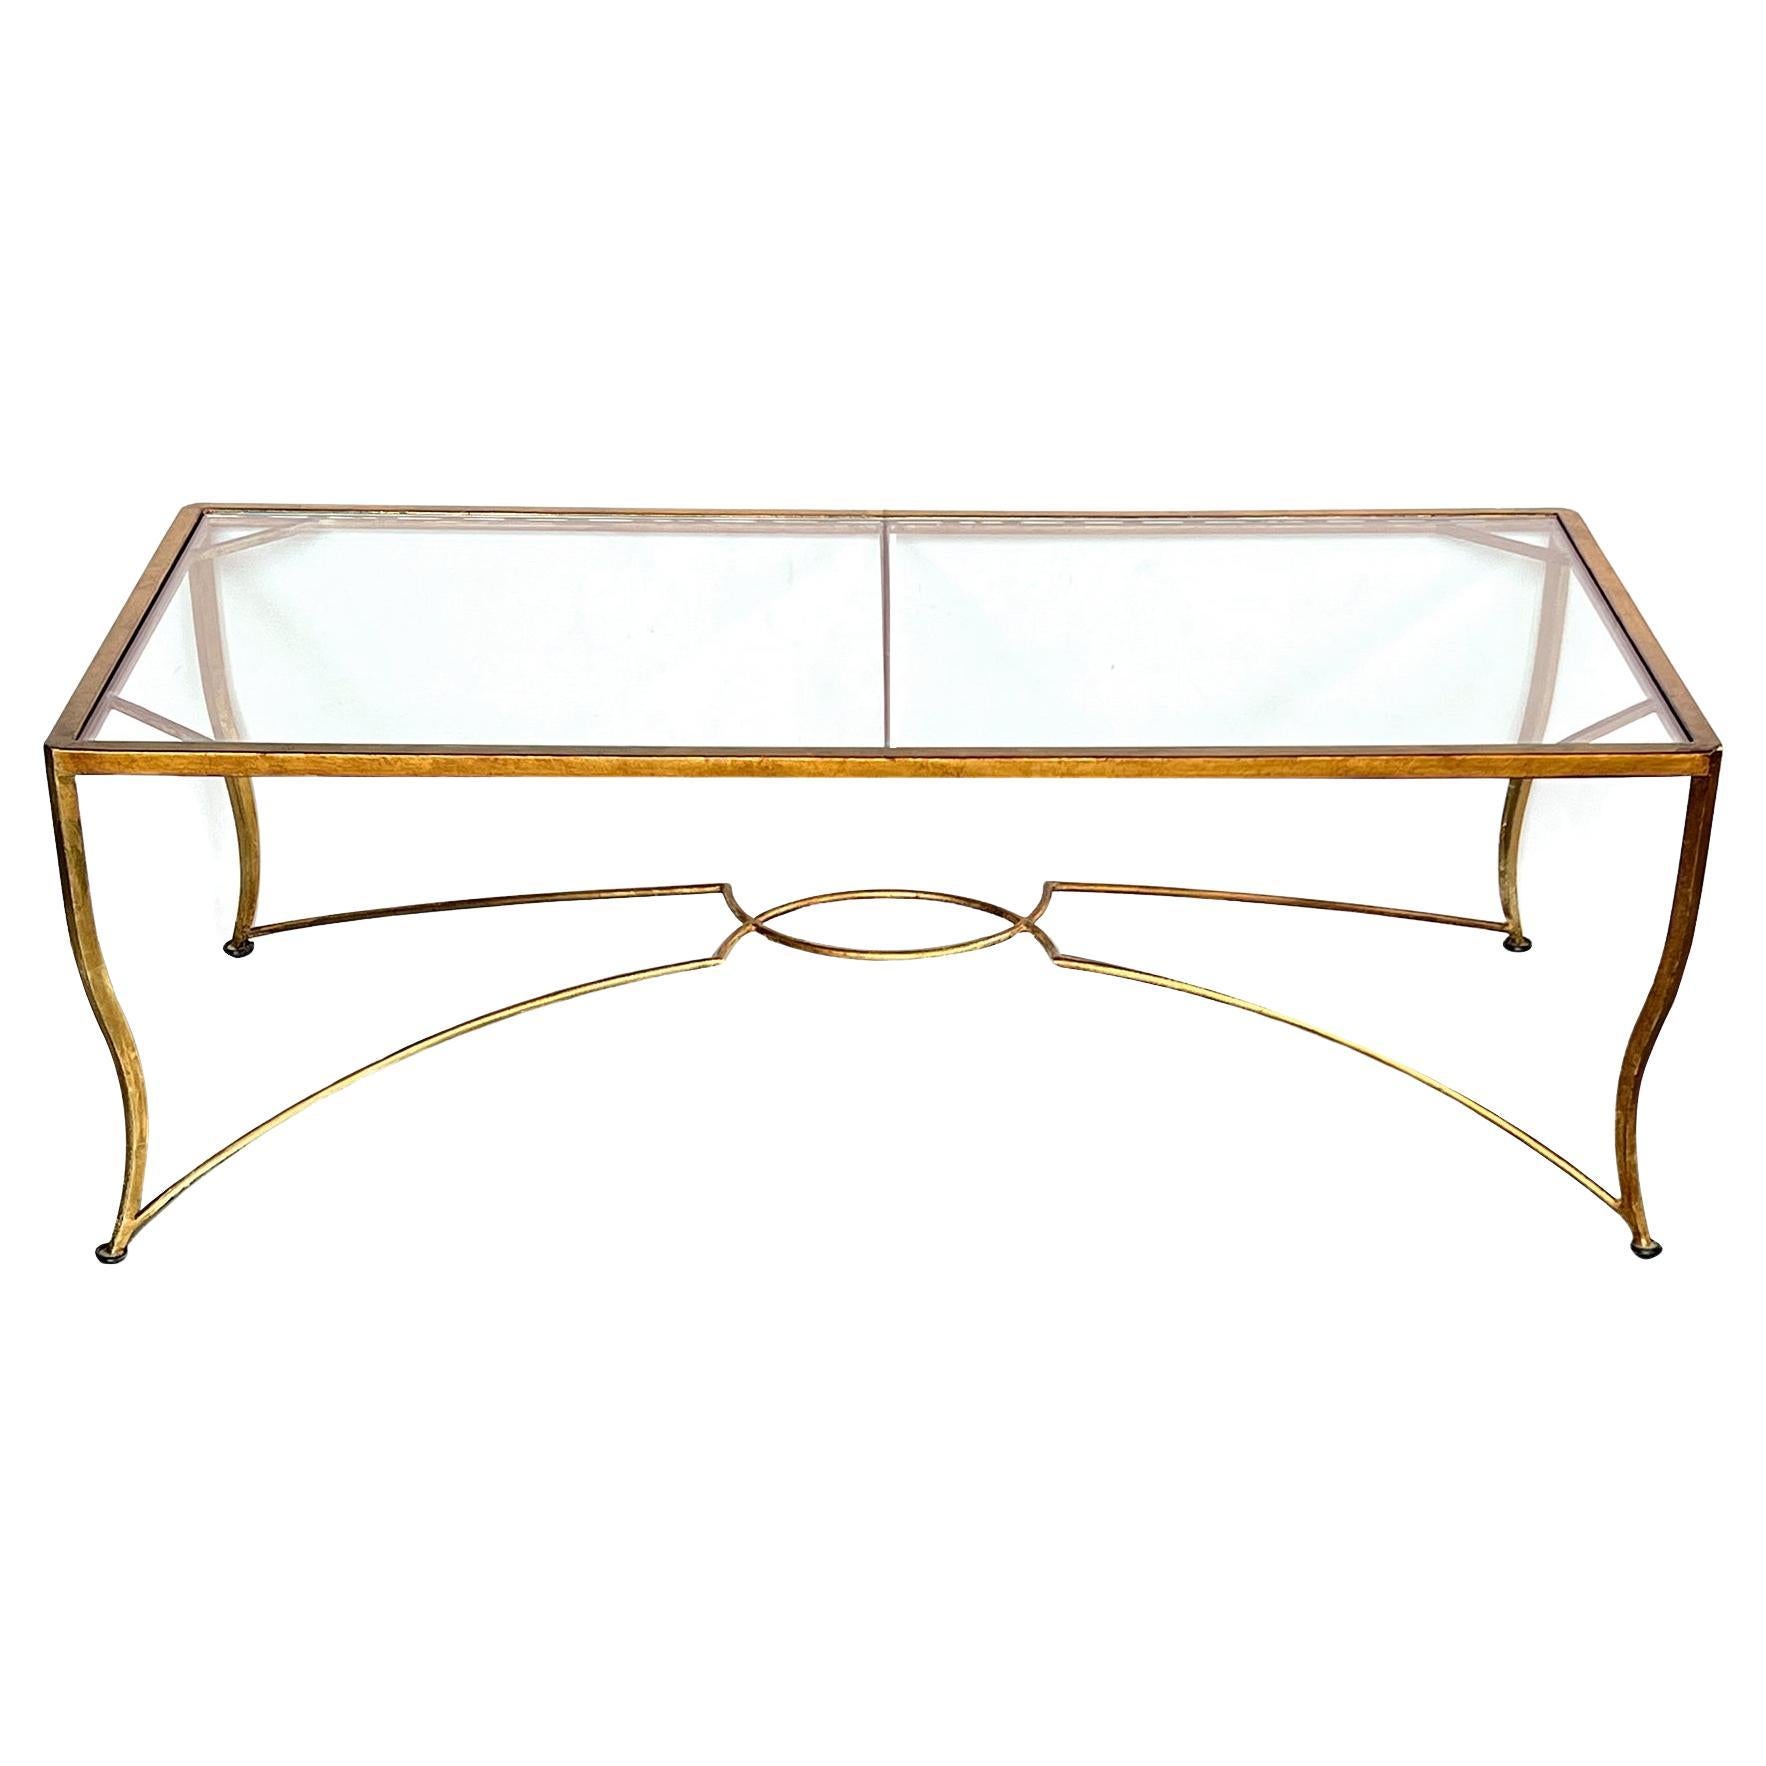 A Shapely Italian 1960s Gilt-iron Rectangular Coffee Table with Glass Top For Sale